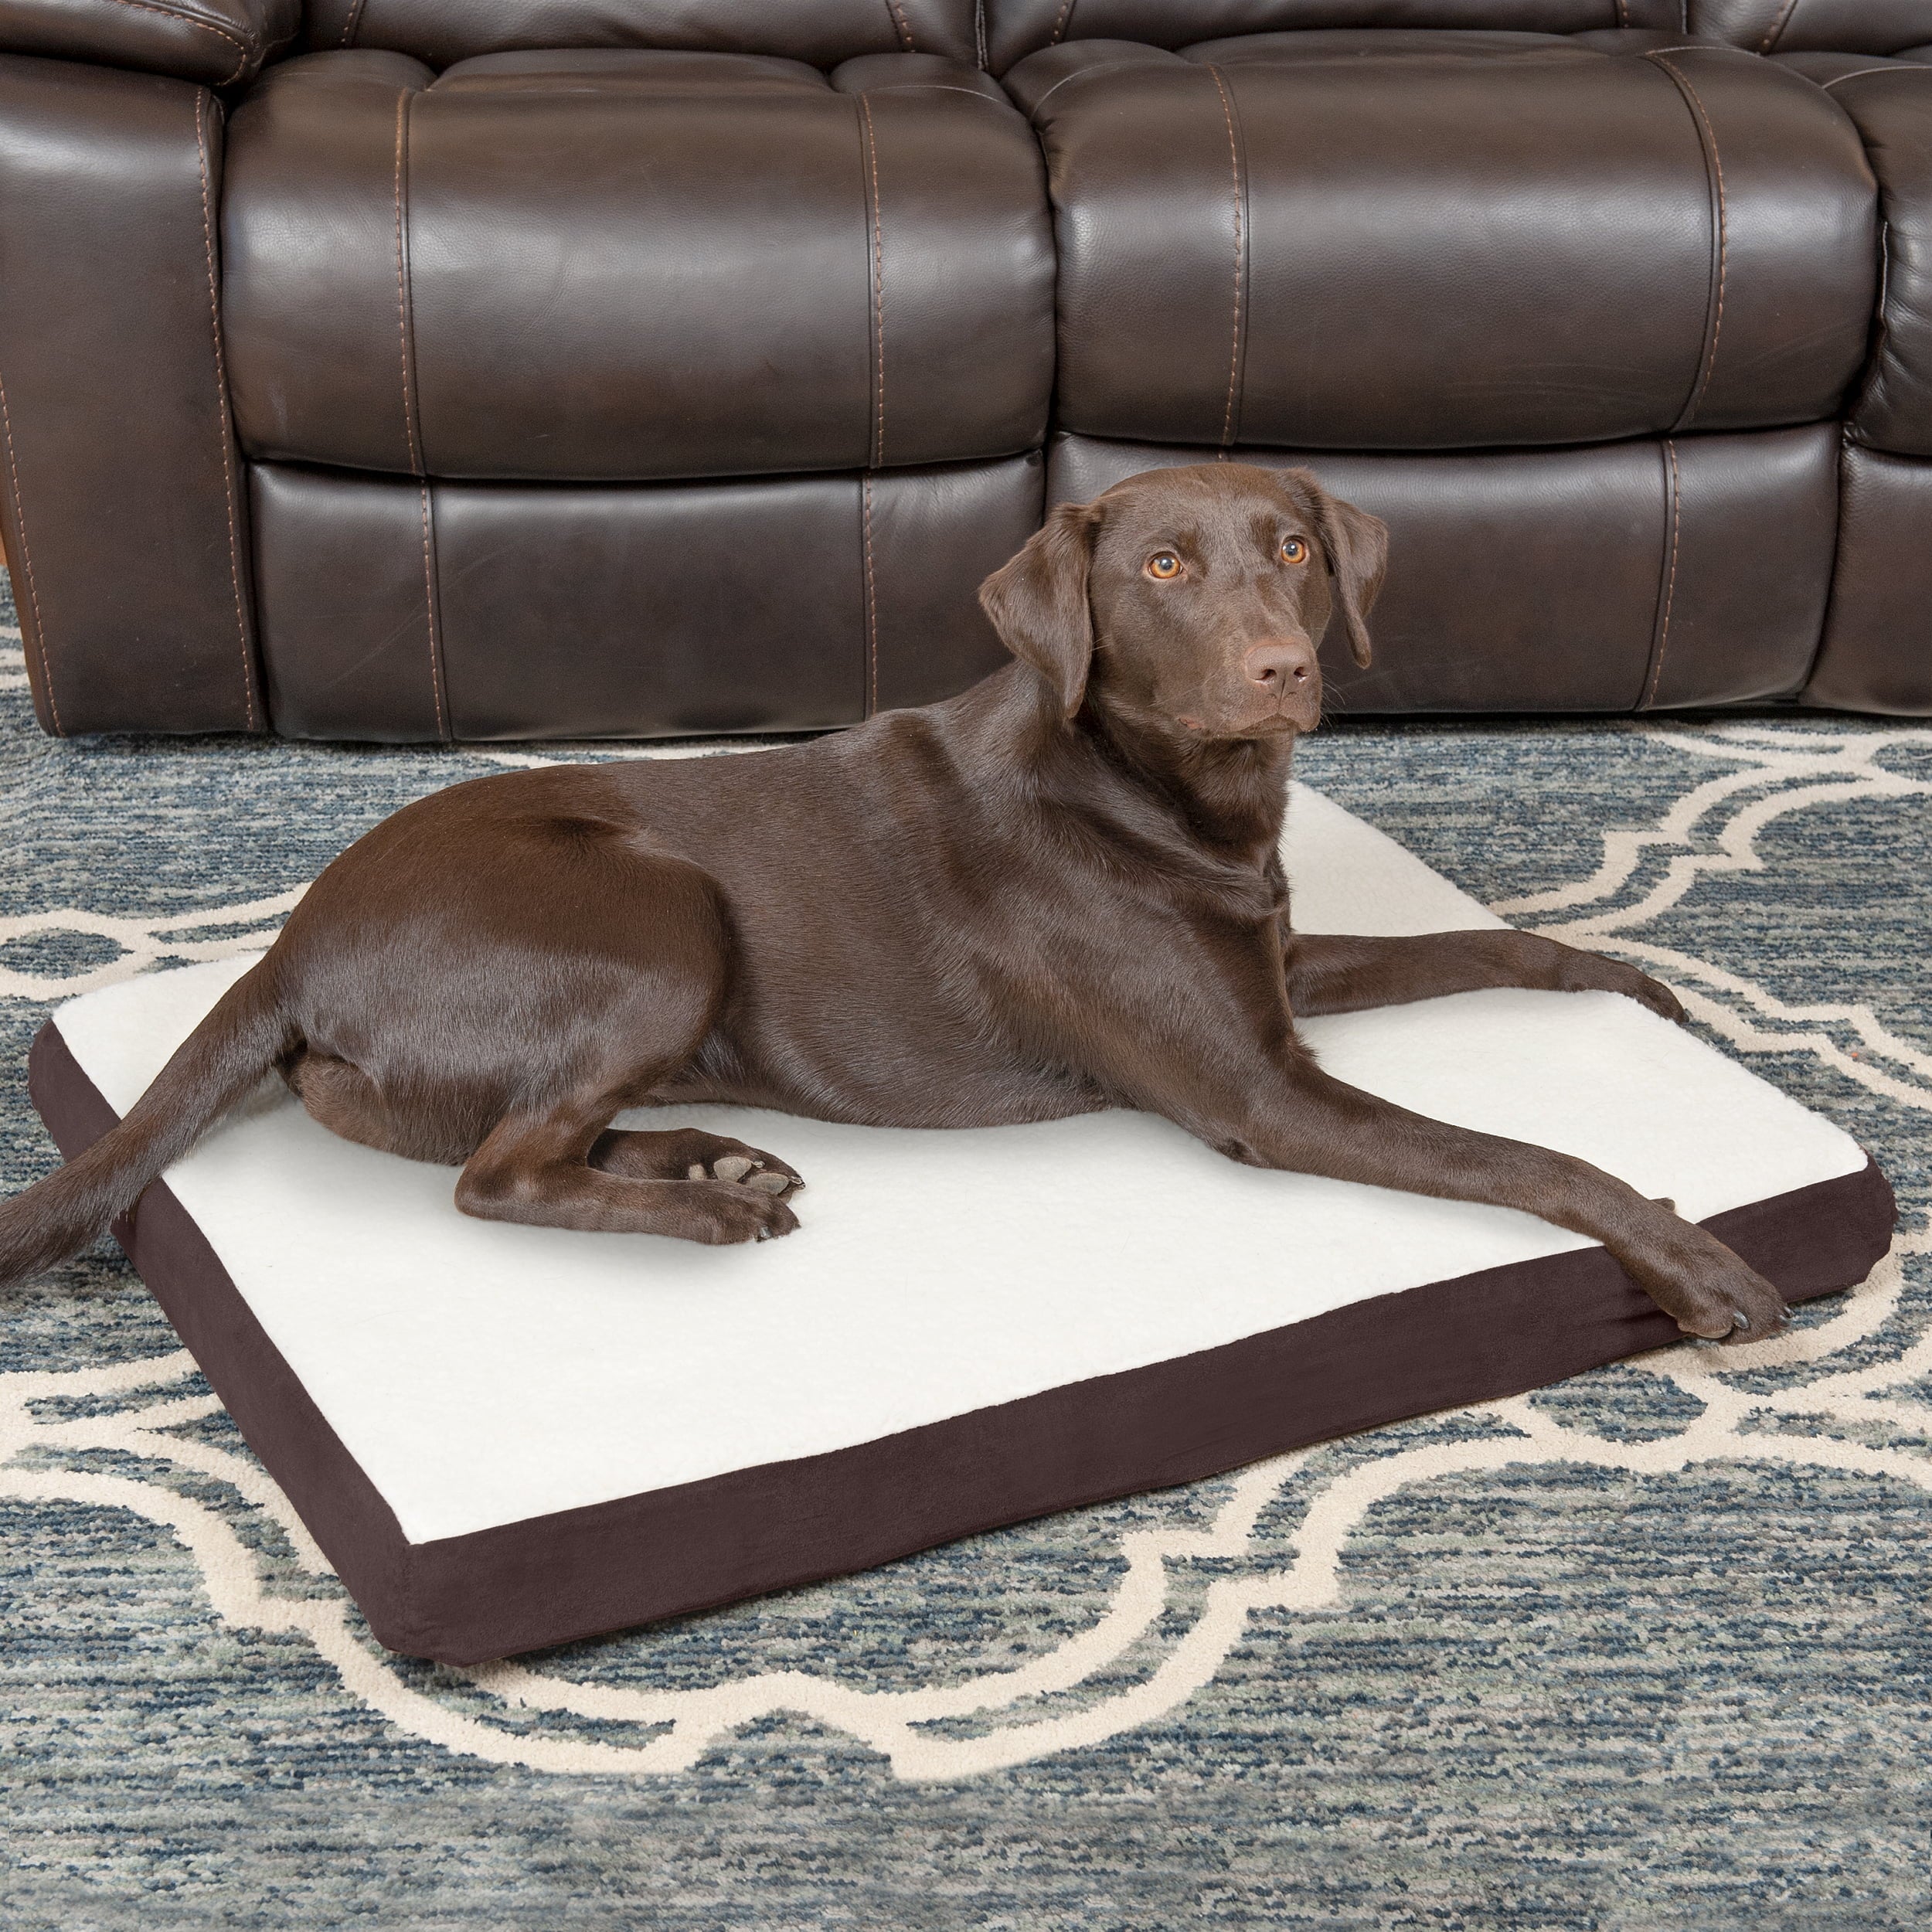 FurHaven Pet Products Faux Sheepskin and Suede Deluxe Orthopedic Dog Bed - Espresso， Large